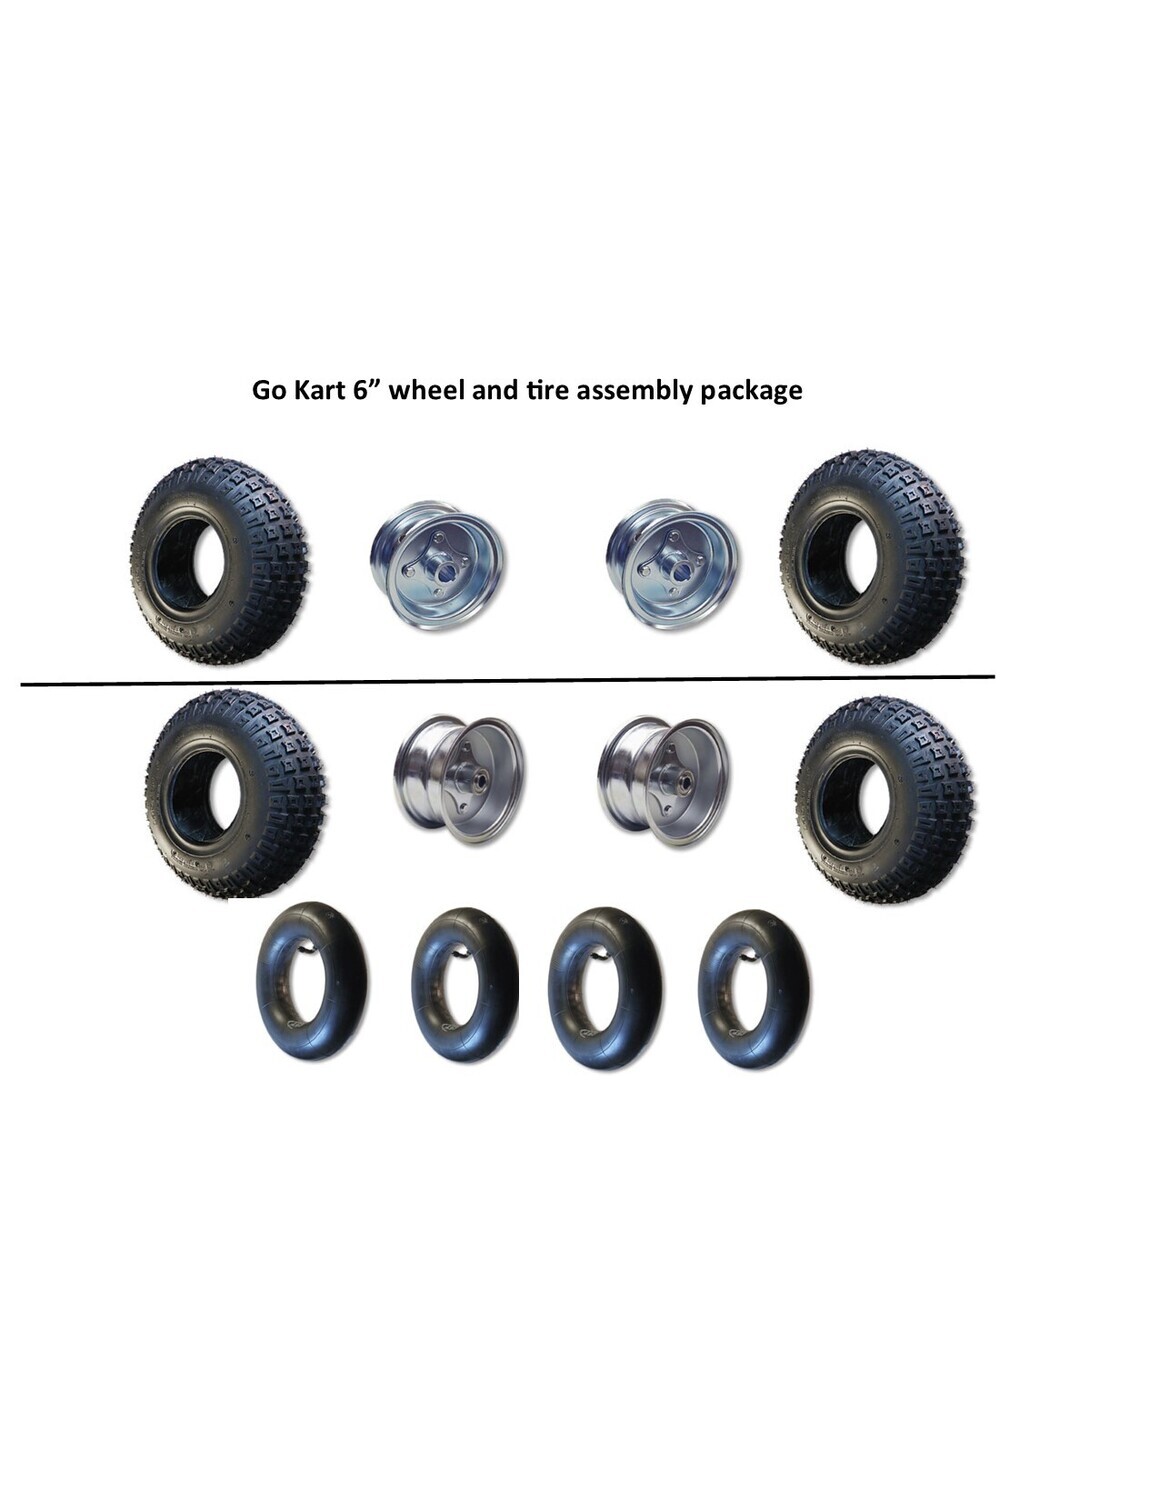 6" Steel Live Axle Tire and wheel Package DIY